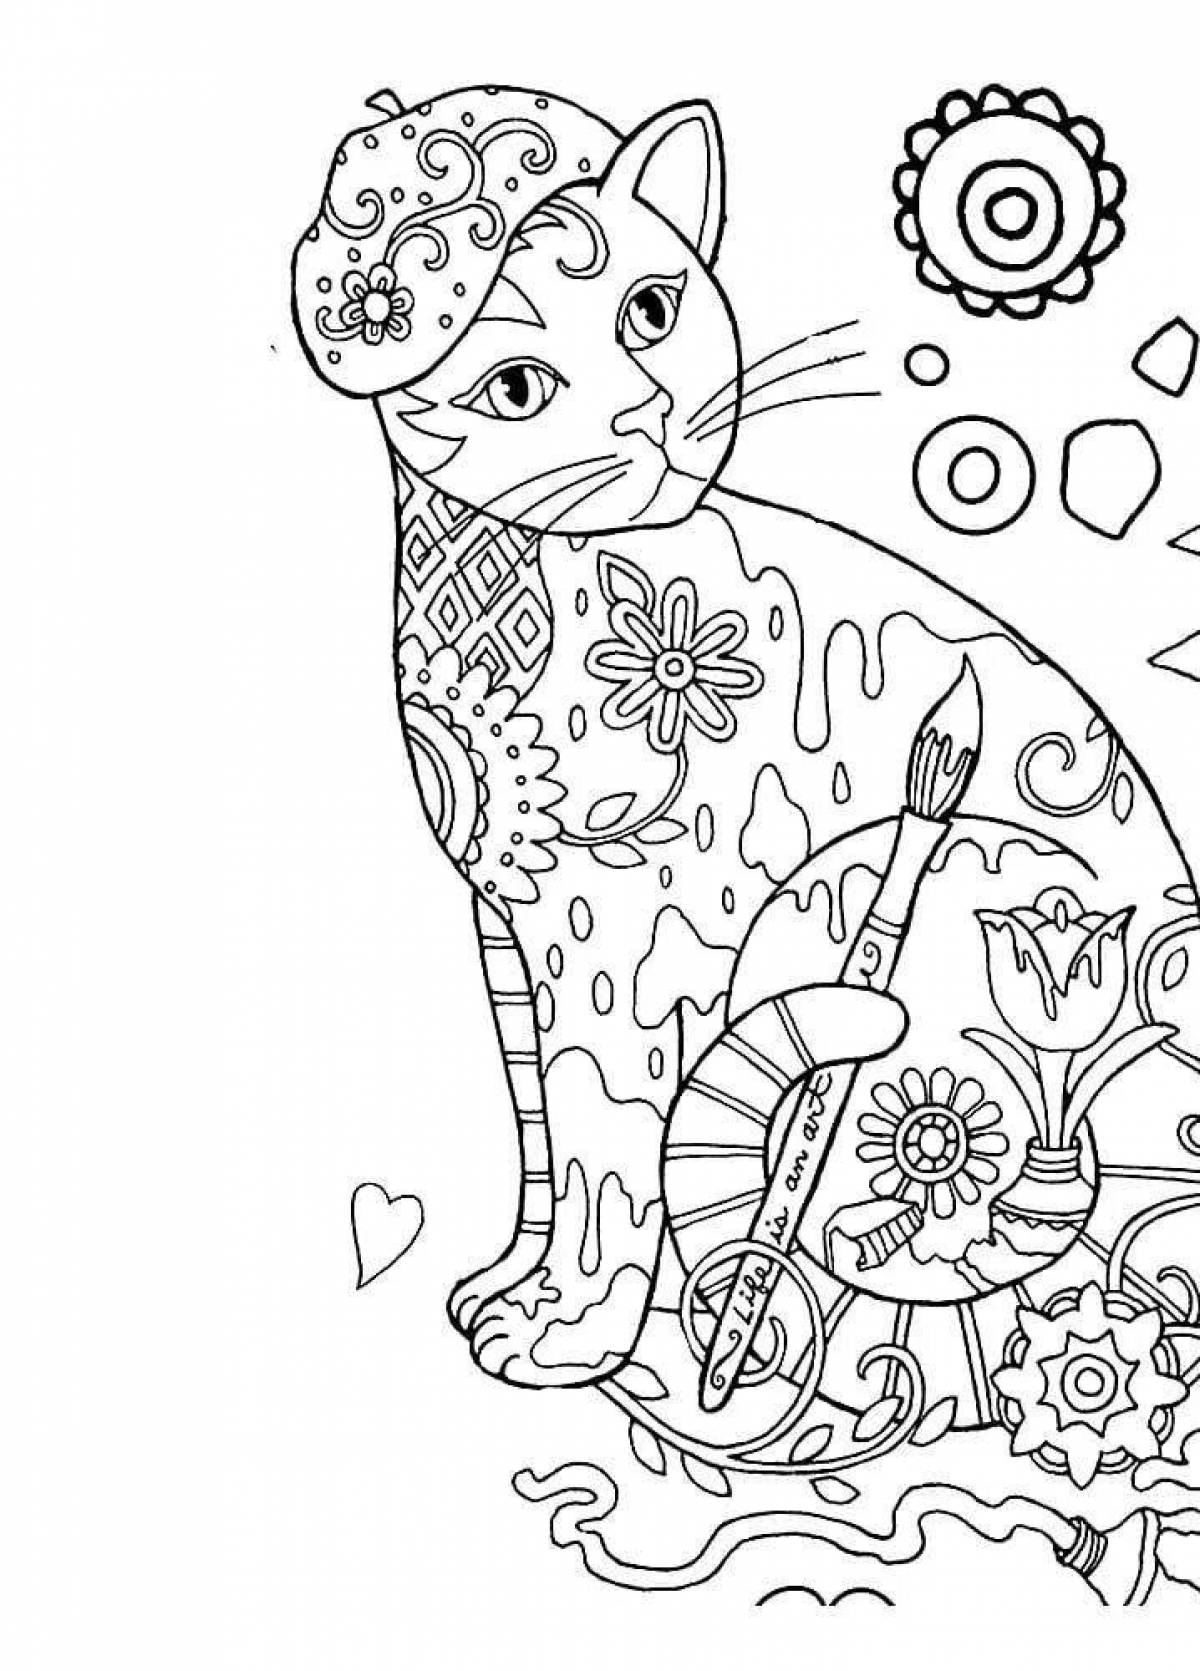 Fancy cat coloring by numbers